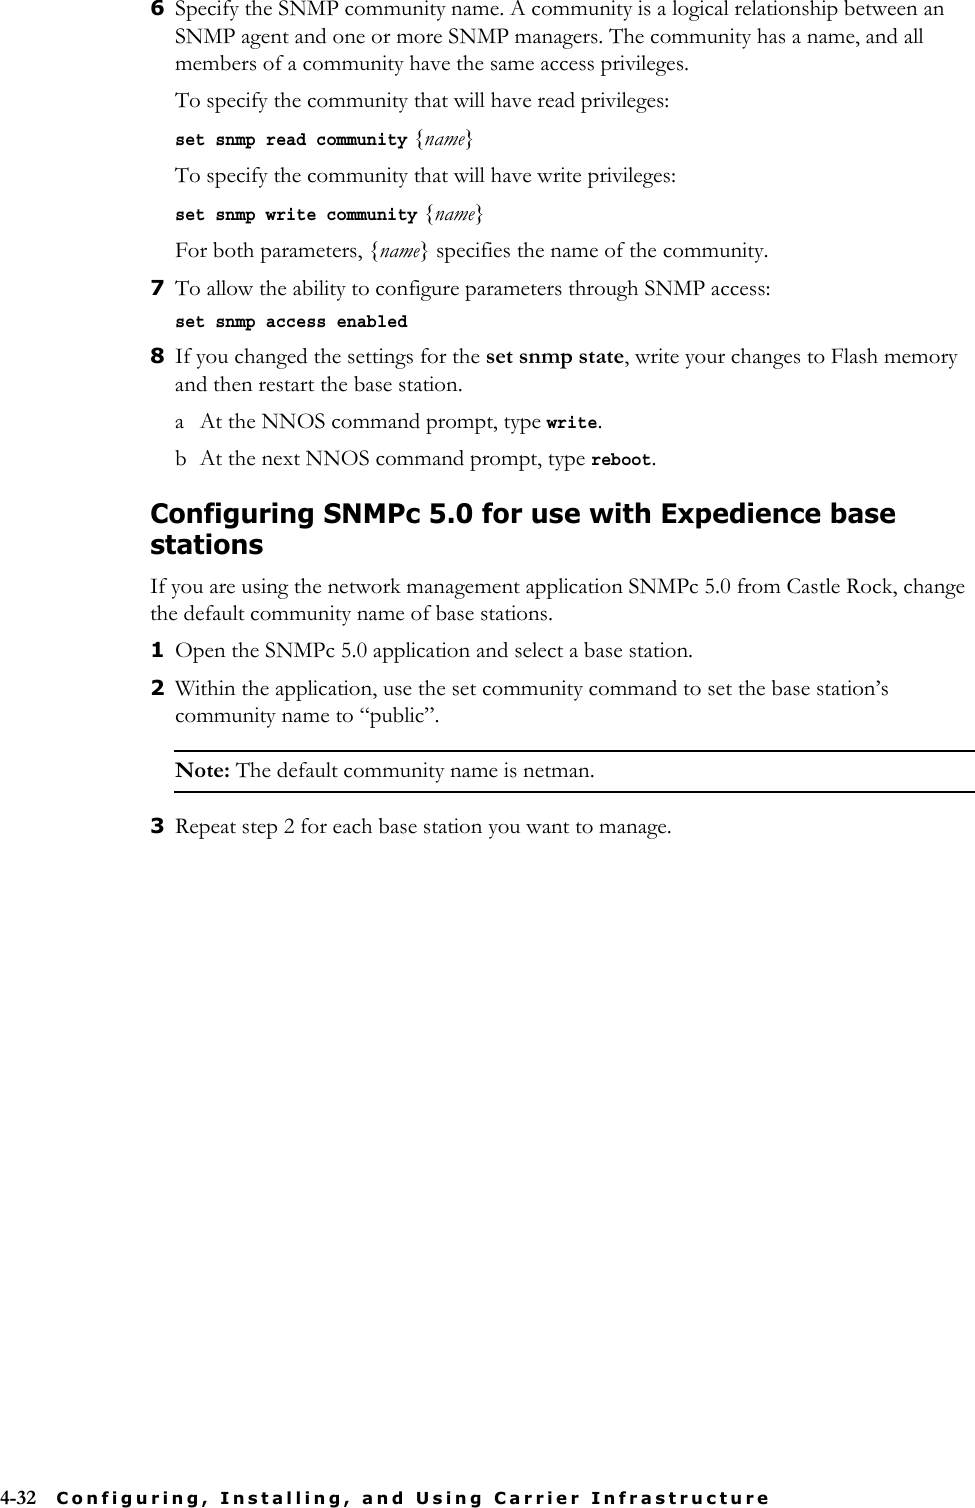 4-32 Configuring, Installing, and Using Carrier Infrastructure6Specify the SNMP community name. A community is a logical relationship between an SNMP agent and one or more SNMP managers. The community has a name, and all members of a community have the same access privileges. To specify the community that will have read privileges:set snmp read community {name}To specify the community that will have write privileges:set snmp write community {name}For both parameters, {name} specifies the name of the community.7To allow the ability to configure parameters through SNMP access:set snmp access enabled8If you changed the settings for the set snmp state, write your changes to Flash memory and then restart the base station. a At the NNOS command prompt, type write.b At the next NNOS command prompt, type reboot.Configuring SNMPc 5.0 for use with Expedience base stationsIf you are using the network management application SNMPc 5.0 from Castle Rock, change the default community name of base stations. 1Open the SNMPc 5.0 application and select a base station. 2Within the application, use the set community command to set the base station’s community name to “public”.Note: The default community name is netman.3Repeat step 2 for each base station you want to manage. 